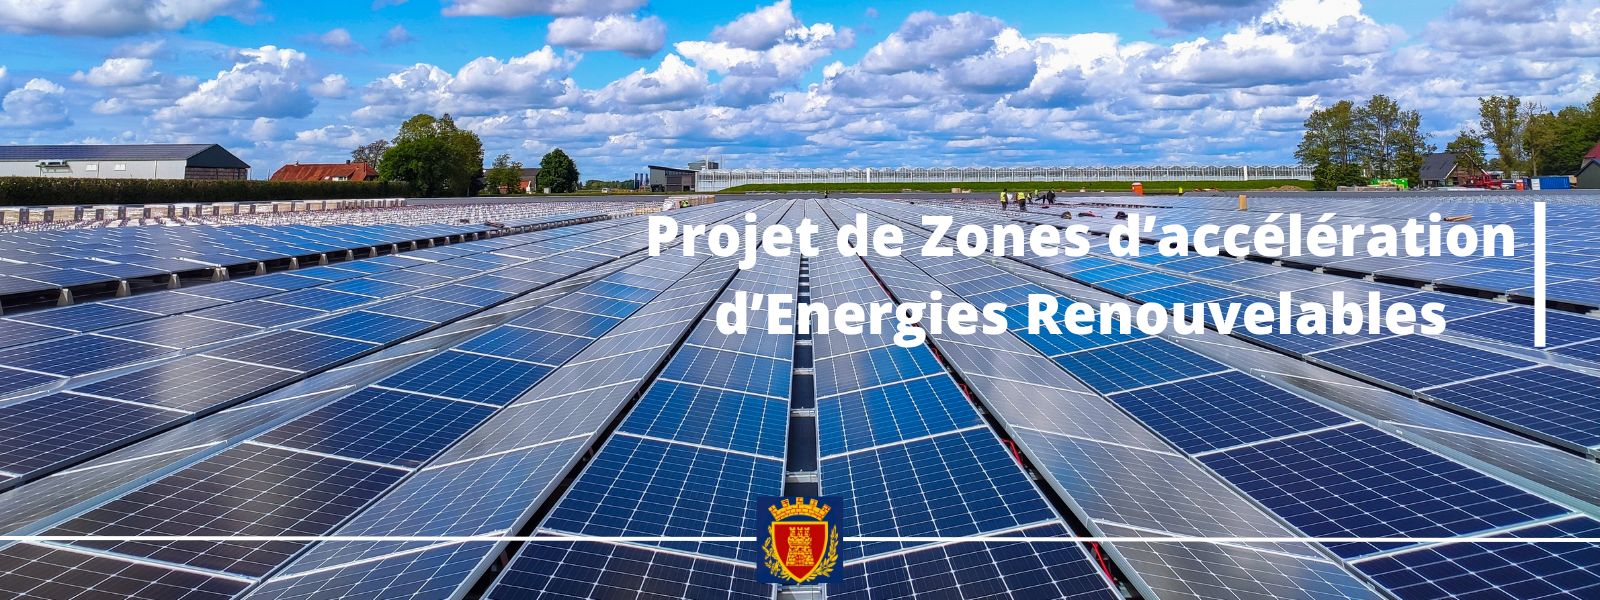 Public consultation - Project for Renewable Energy Acceleration Zones in the municipality of Grimaud